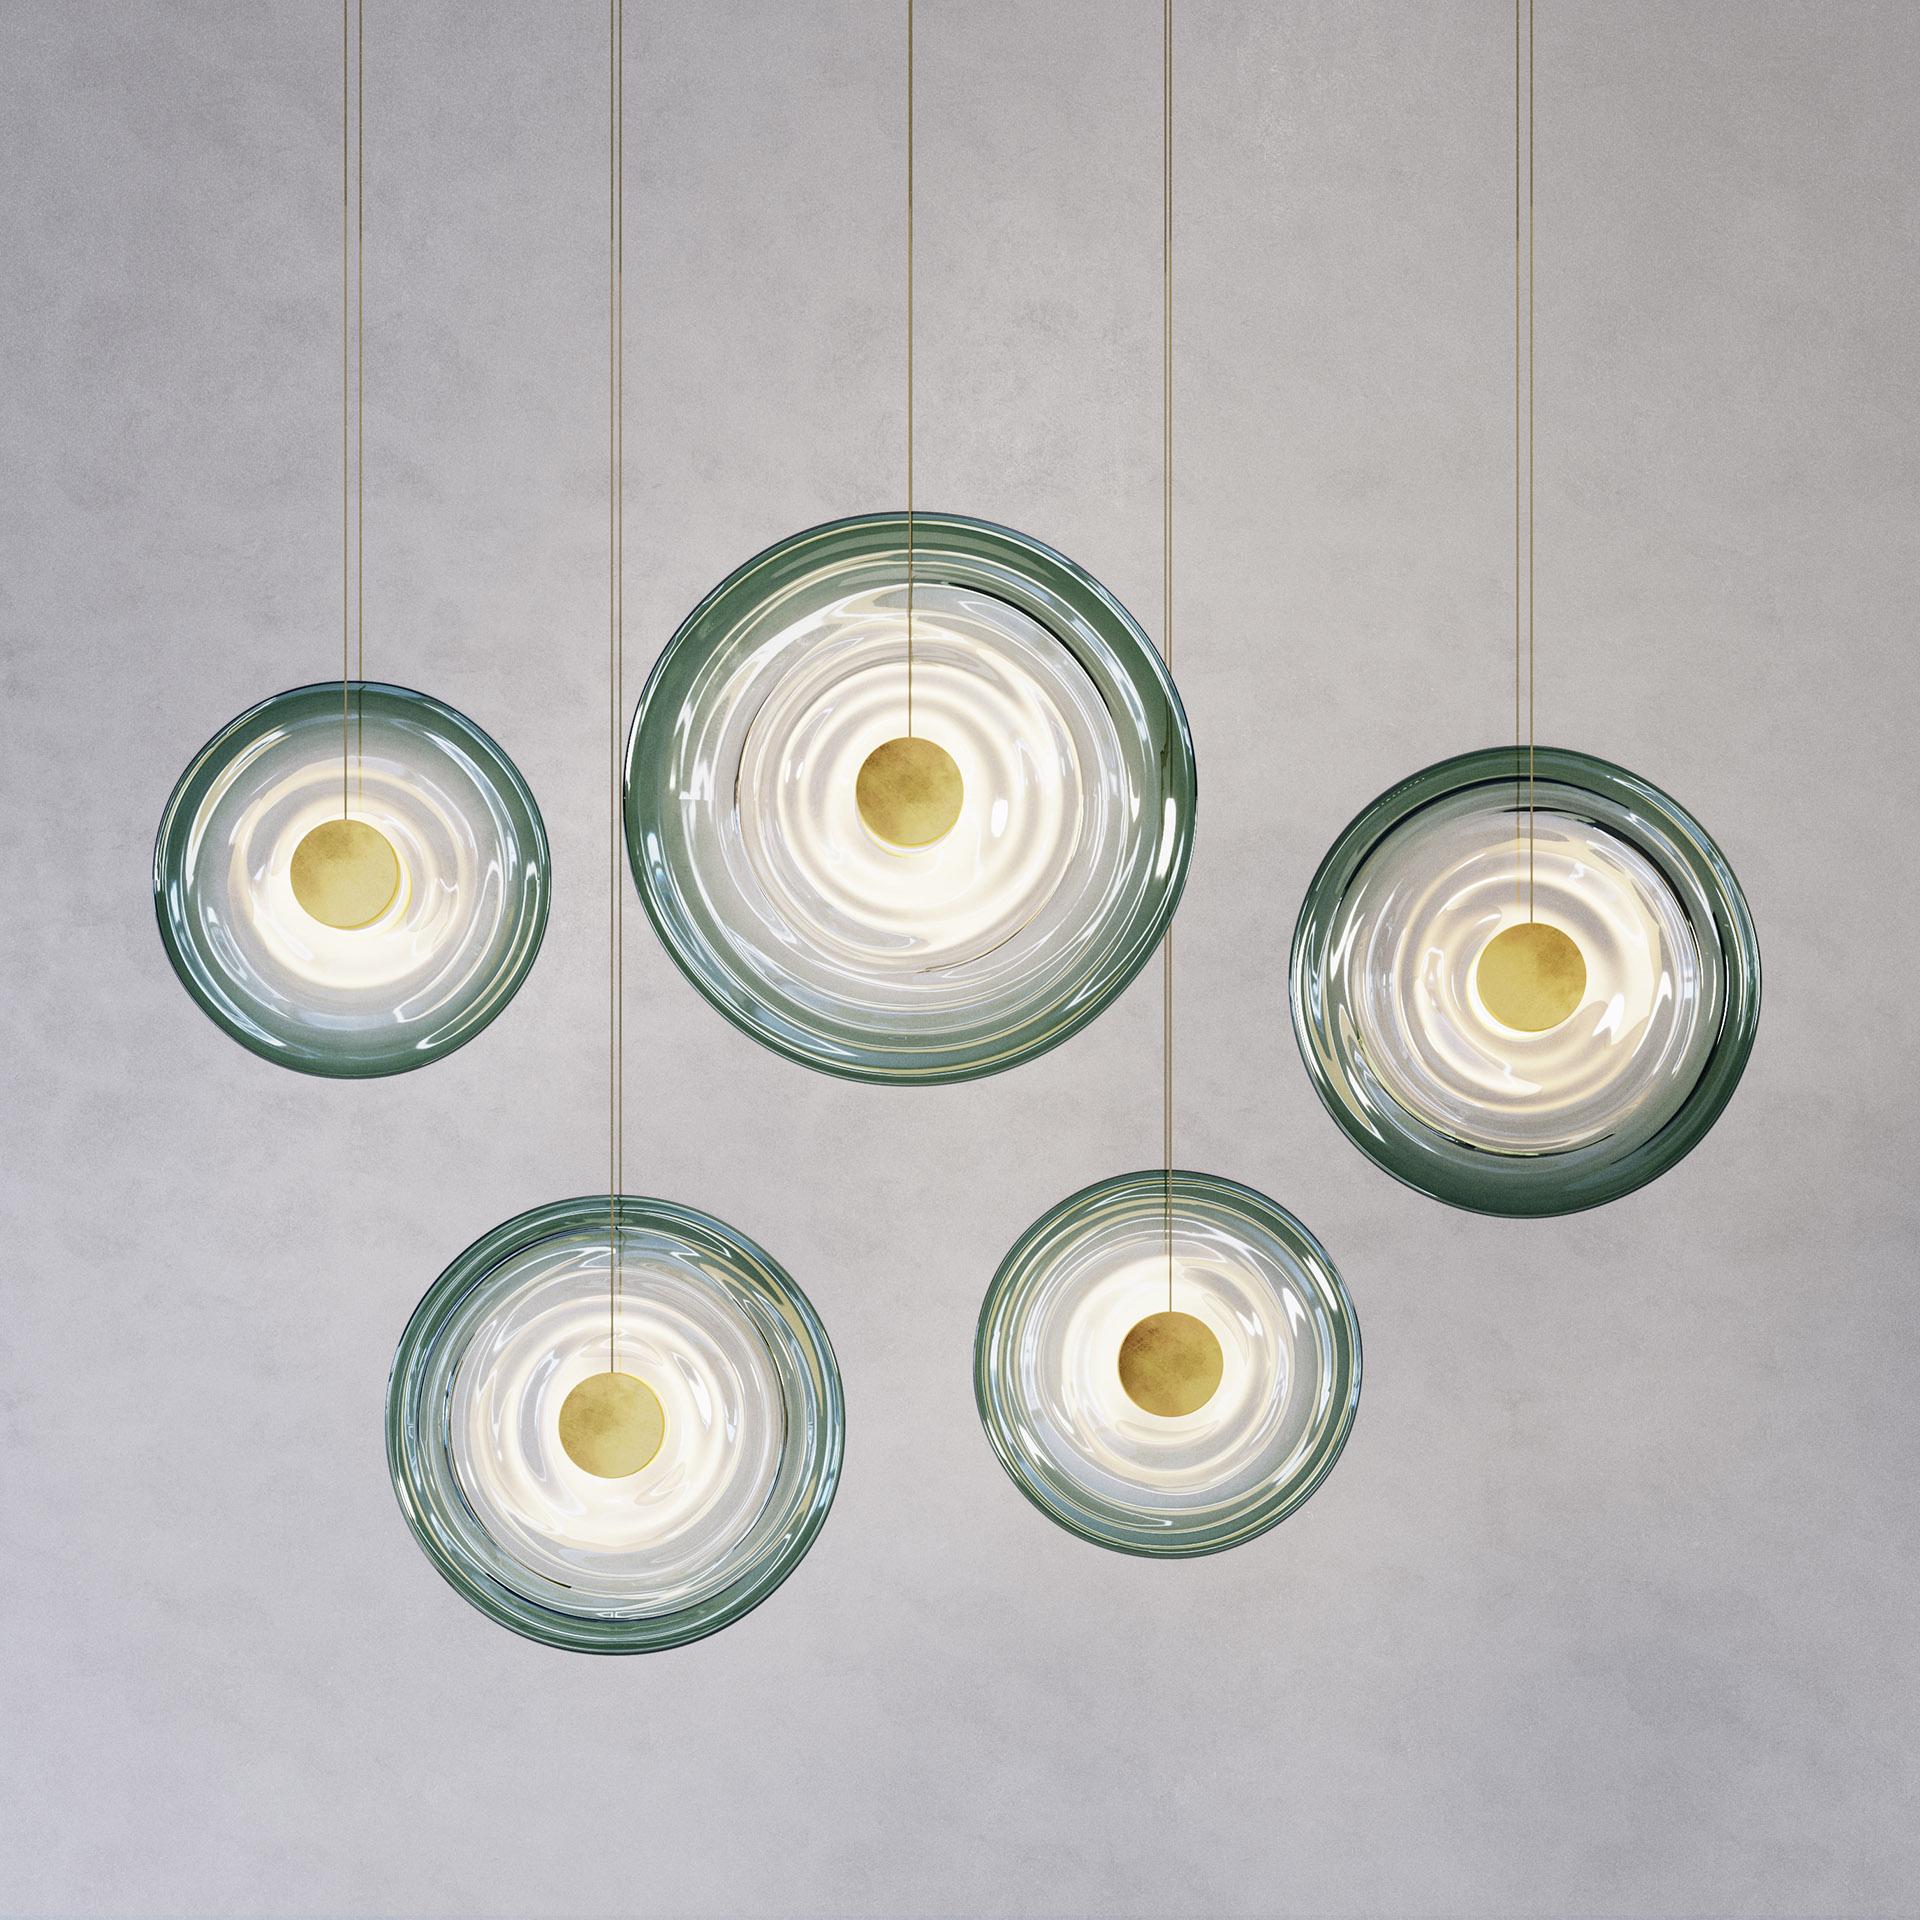 Liquid Vortex Quin Jade Pendant by Atelier001
Dimensions: D17.5 x W142.5 x H93.5 cm
Materials: Hand-blown glass, Brass.
Also Available: In different finishes.

All our lamps can be wired according to each country. If sold to the USA it will be wired